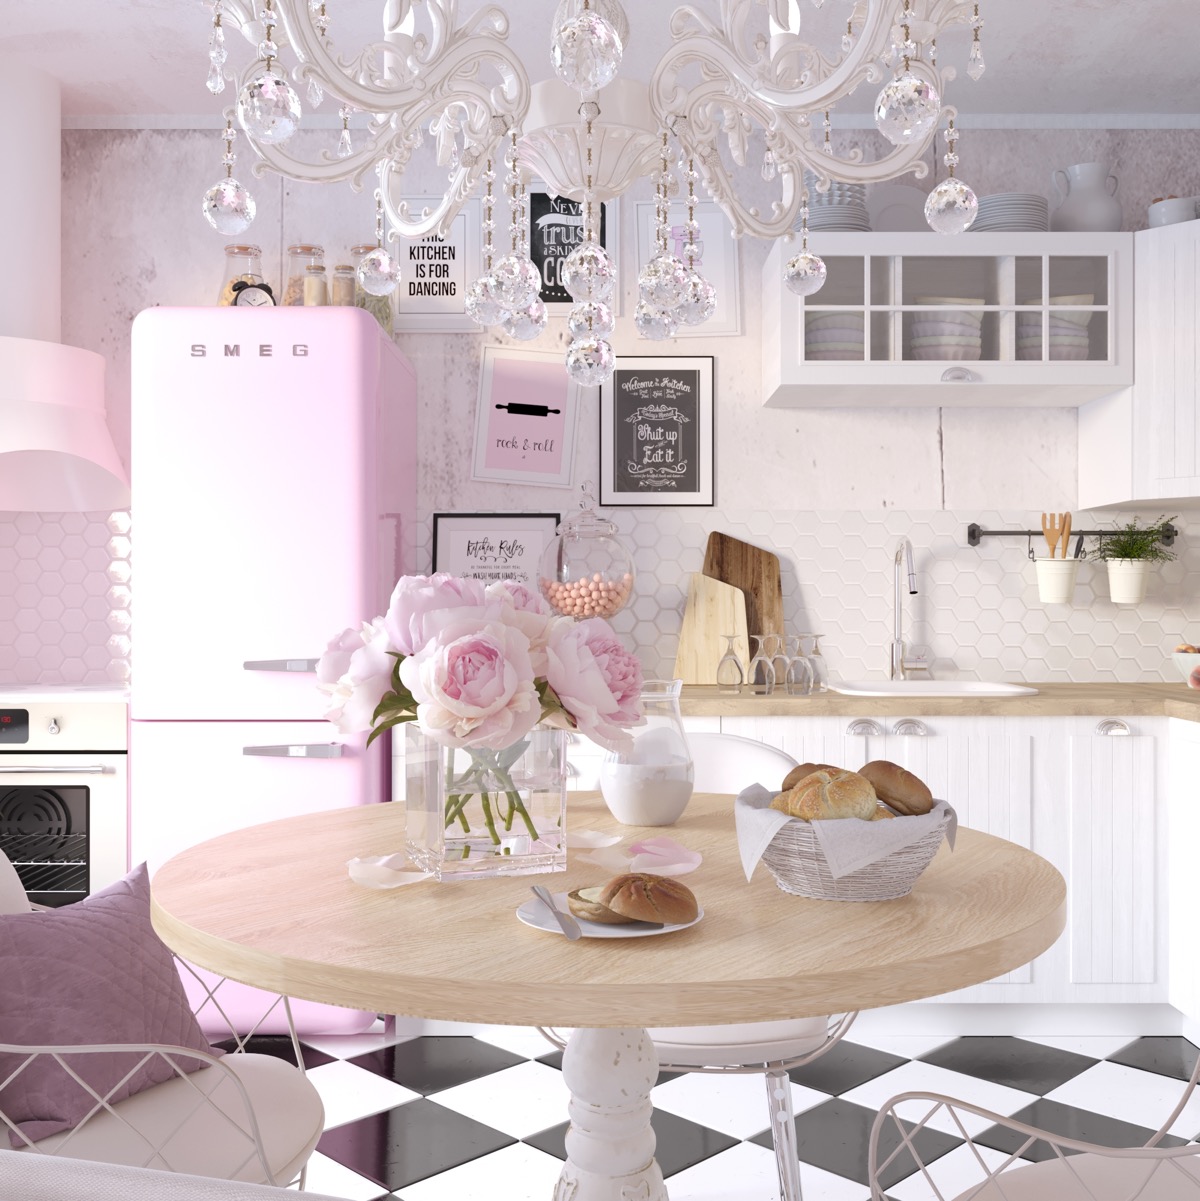 Cool Pink Kitchen Design With Retro and Chic Look - DigsDigs